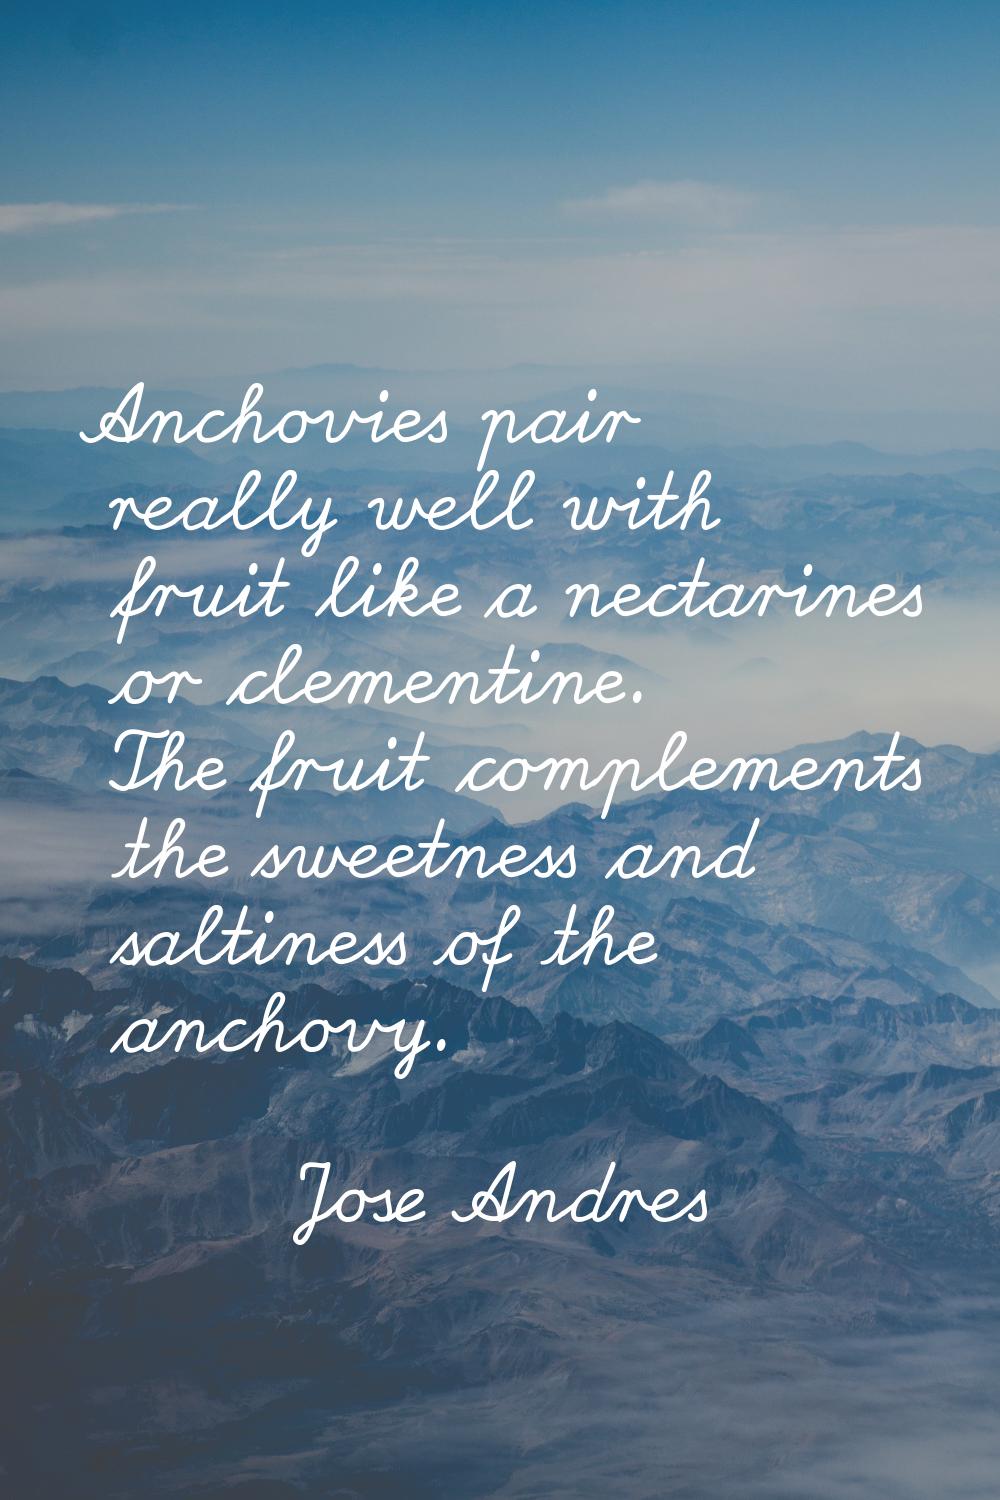 Anchovies pair really well with fruit like a nectarines or clementine. The fruit complements the sw